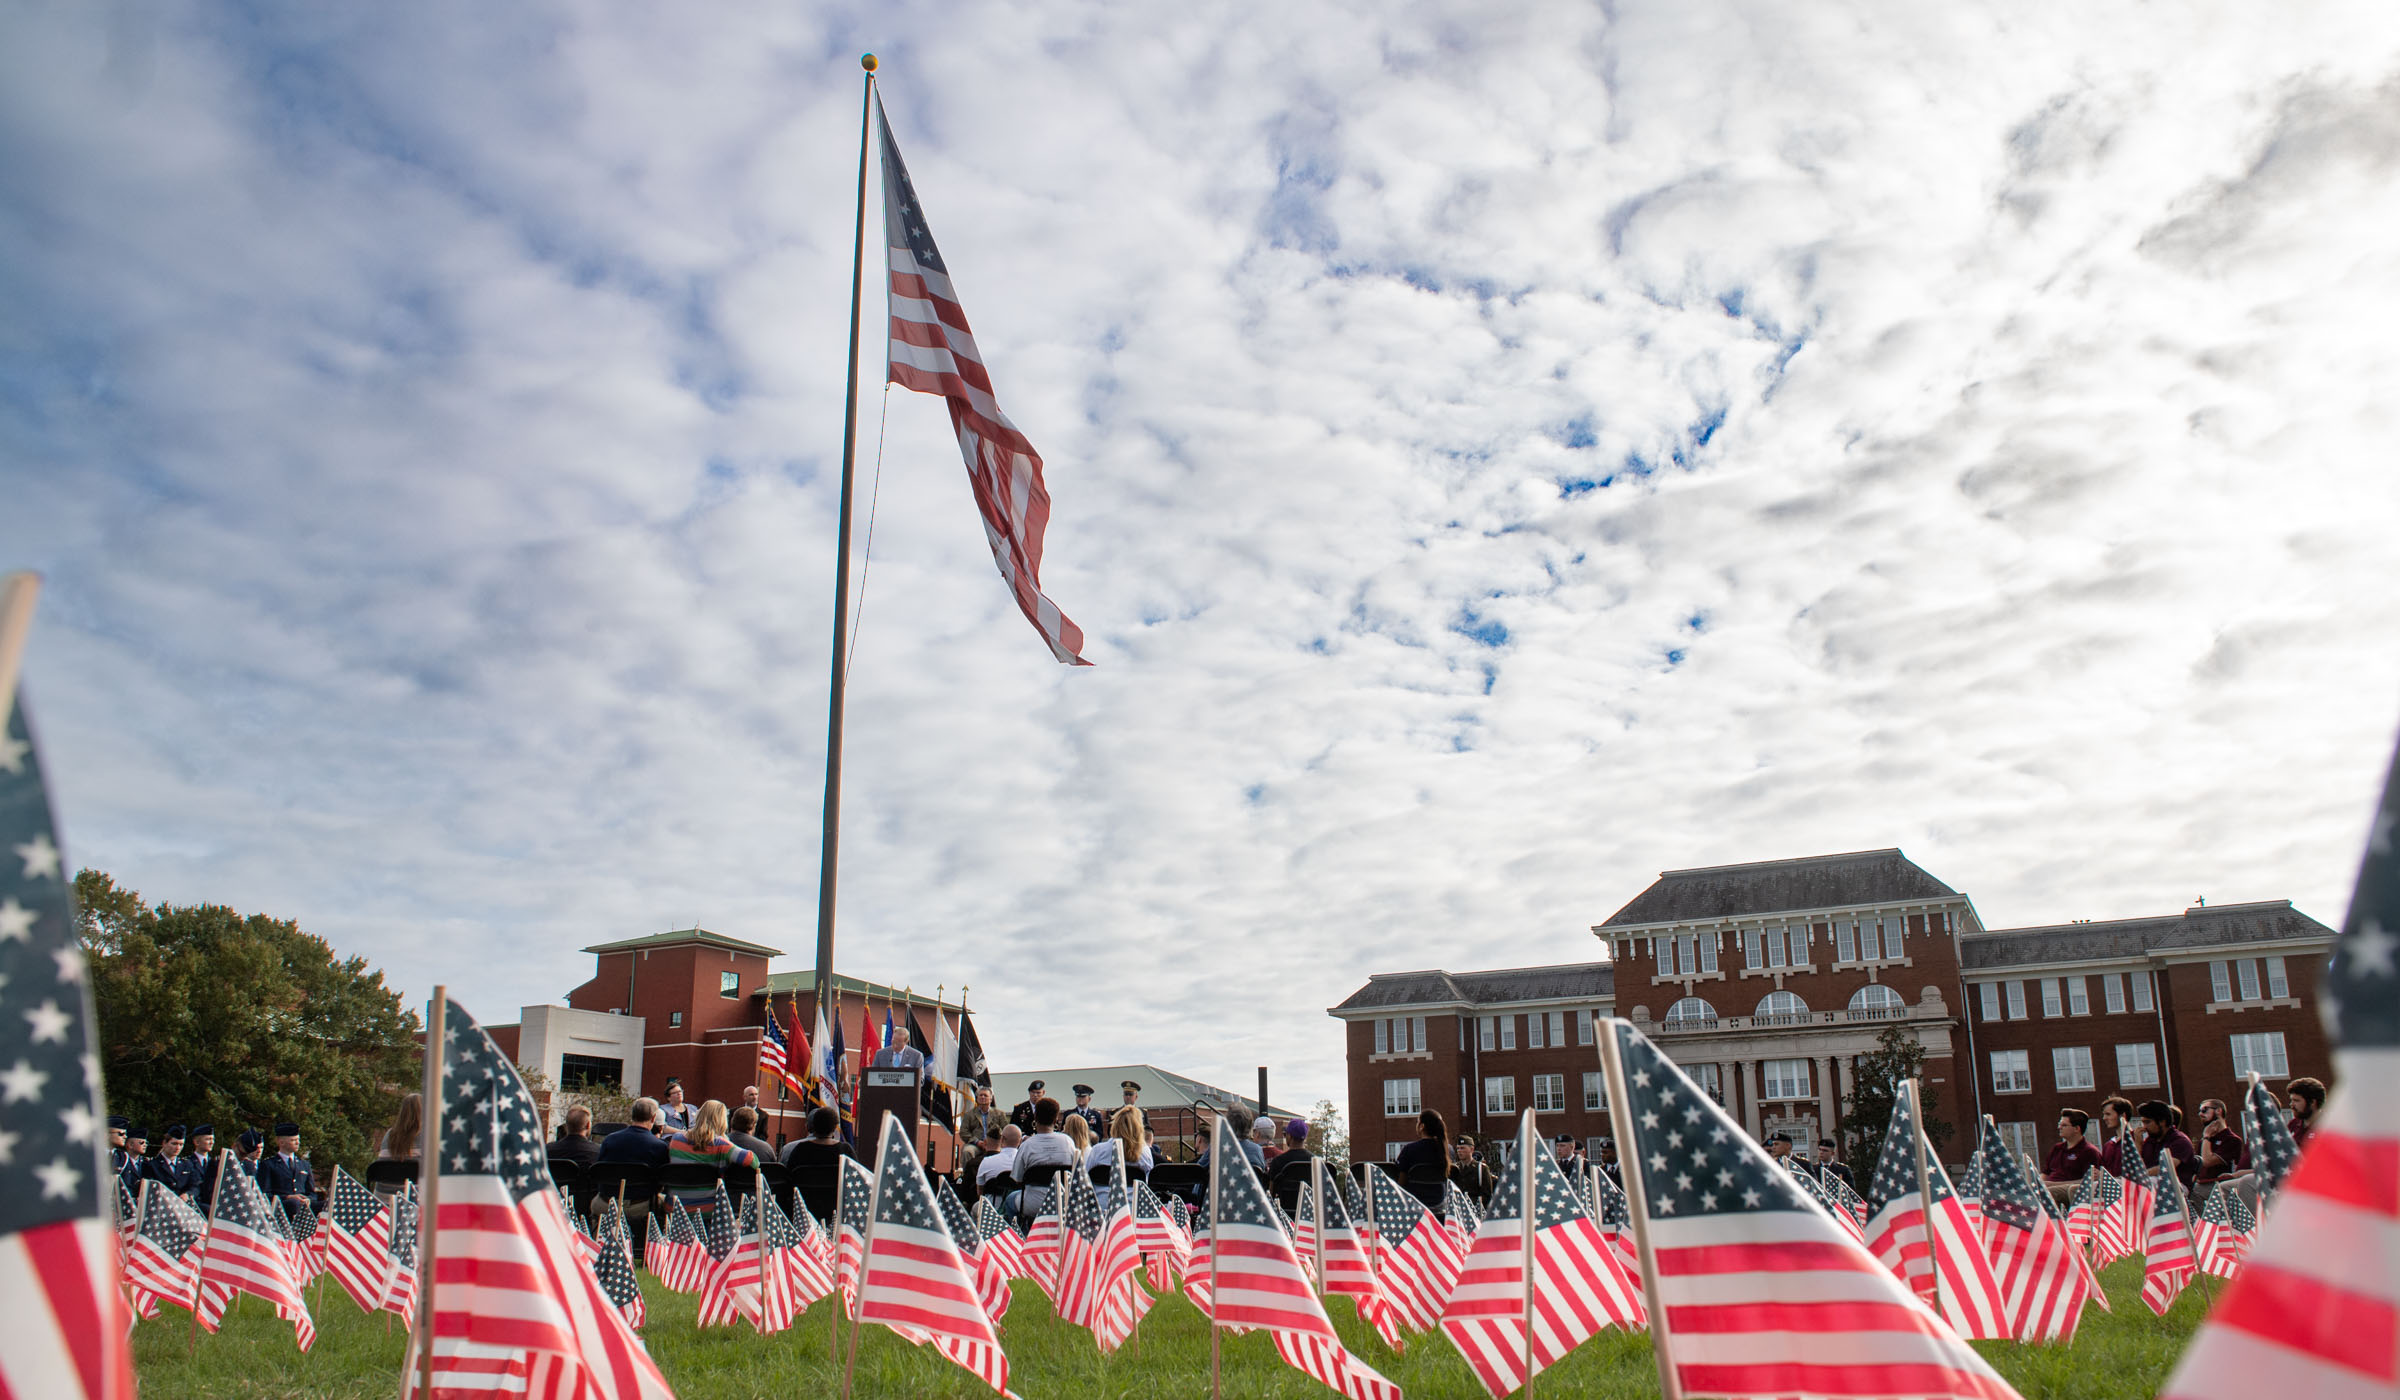 Small American flags fill the grass foreground, with the stage, Drill Field, sky and big American flag in the backfround.